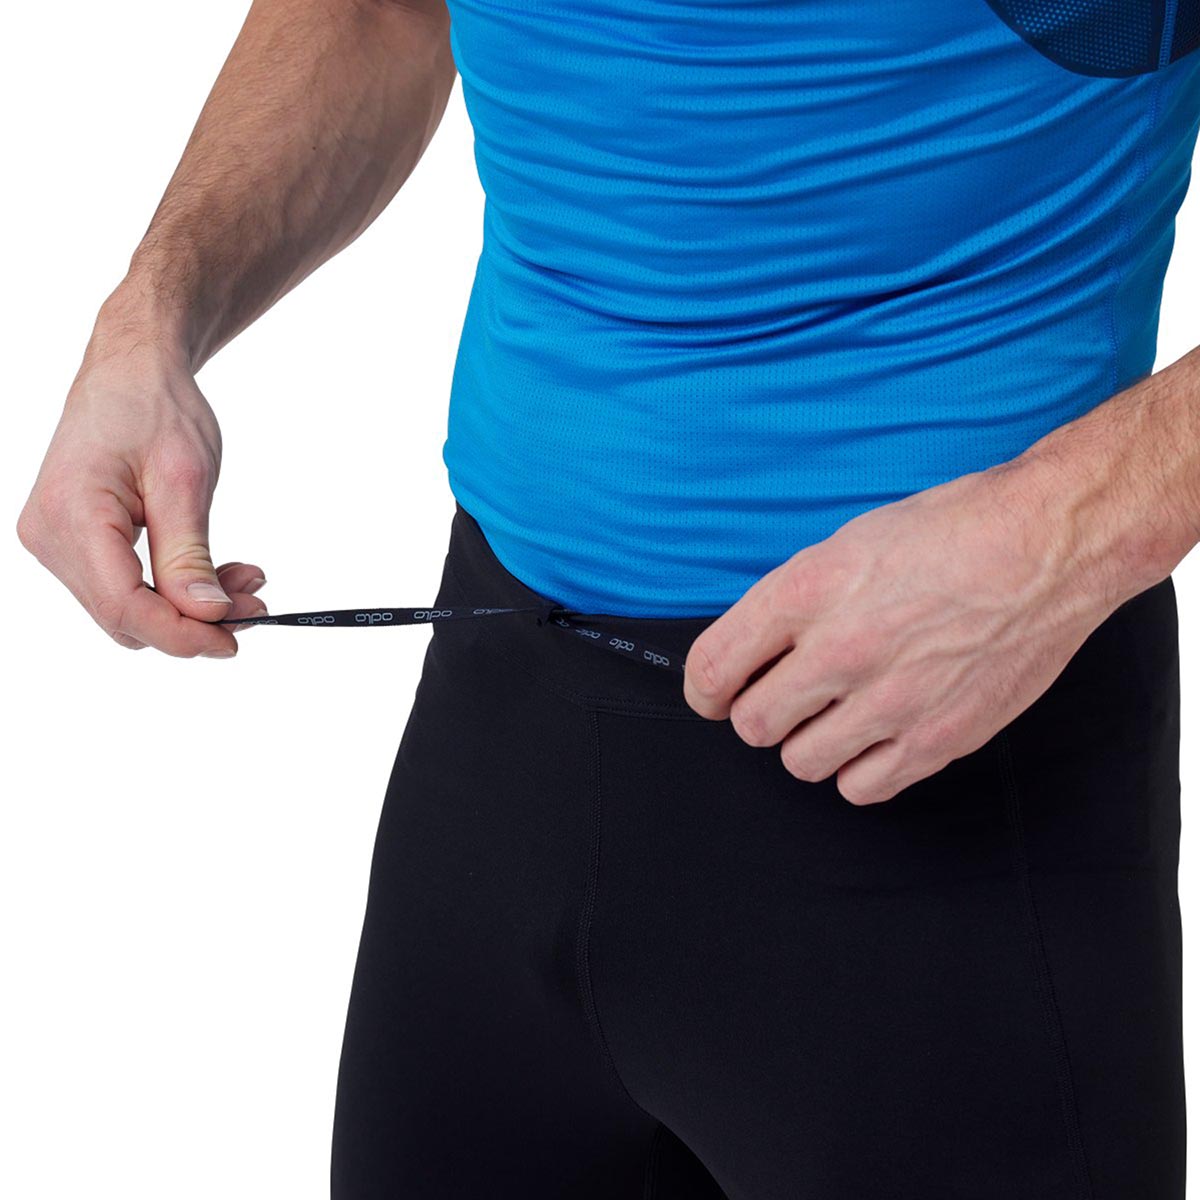 ODLO - THE ESSENTIAL RUNNING TIGHTS